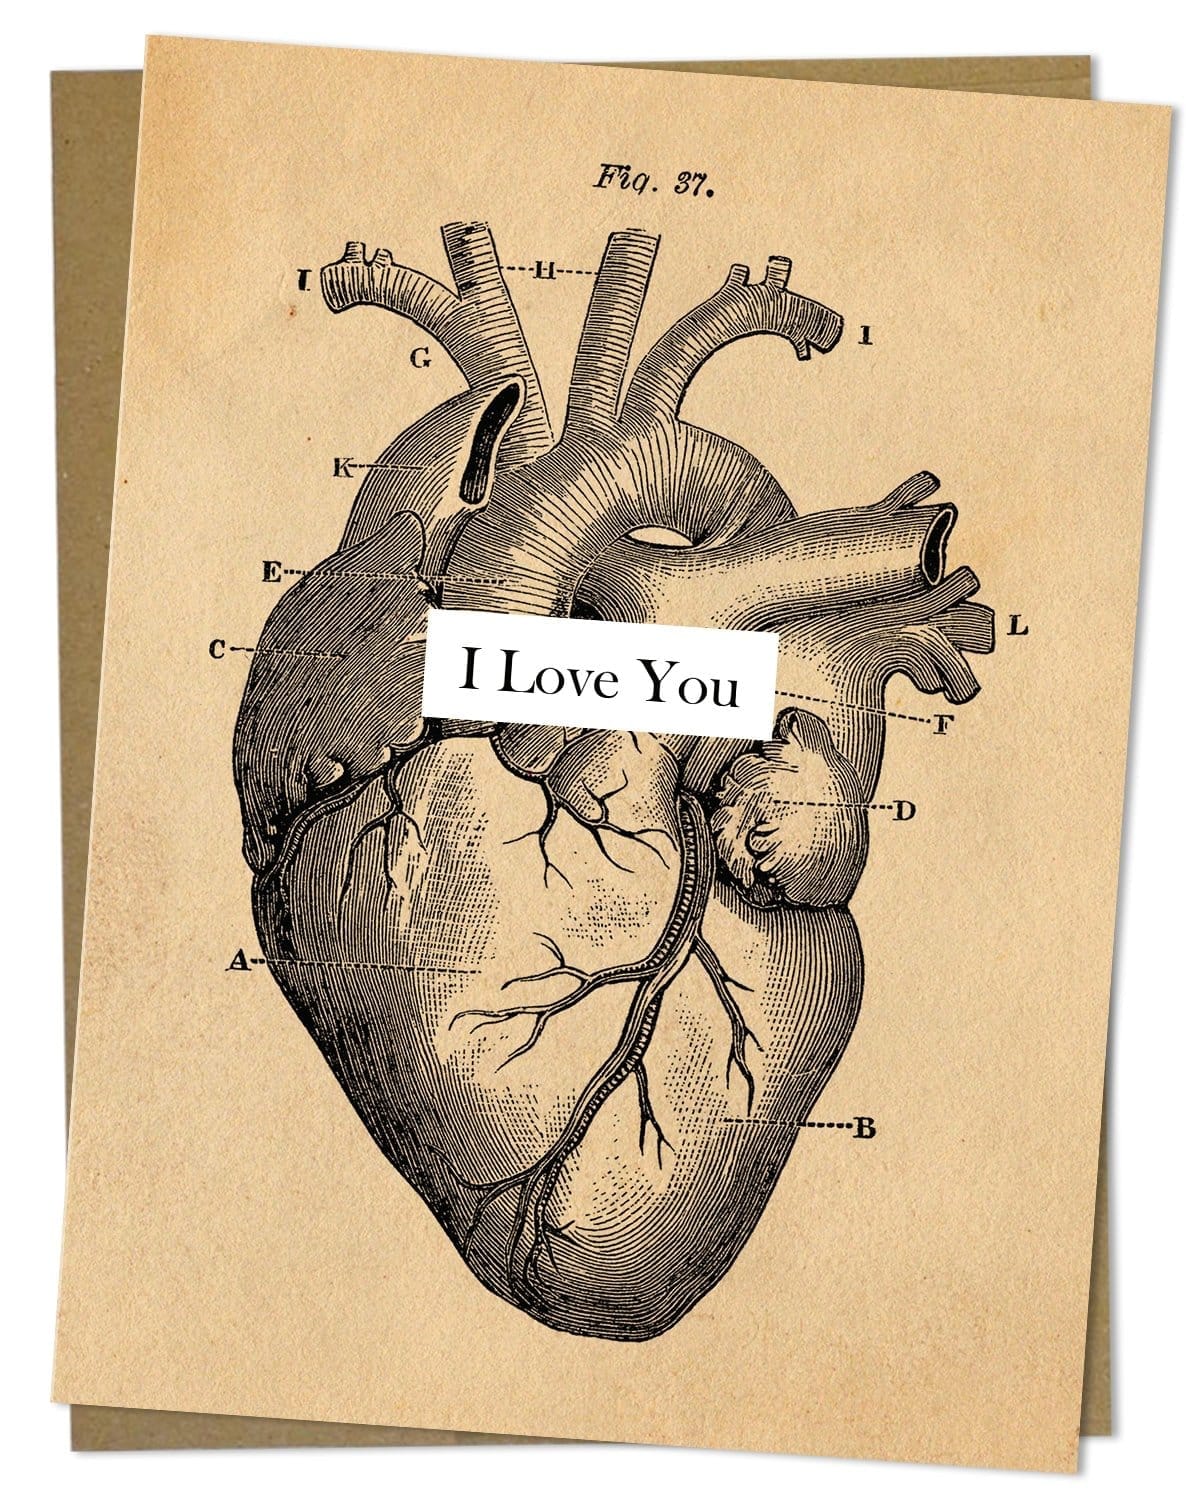 I Love You: Anatomical Heart Card Cognitive Surplus